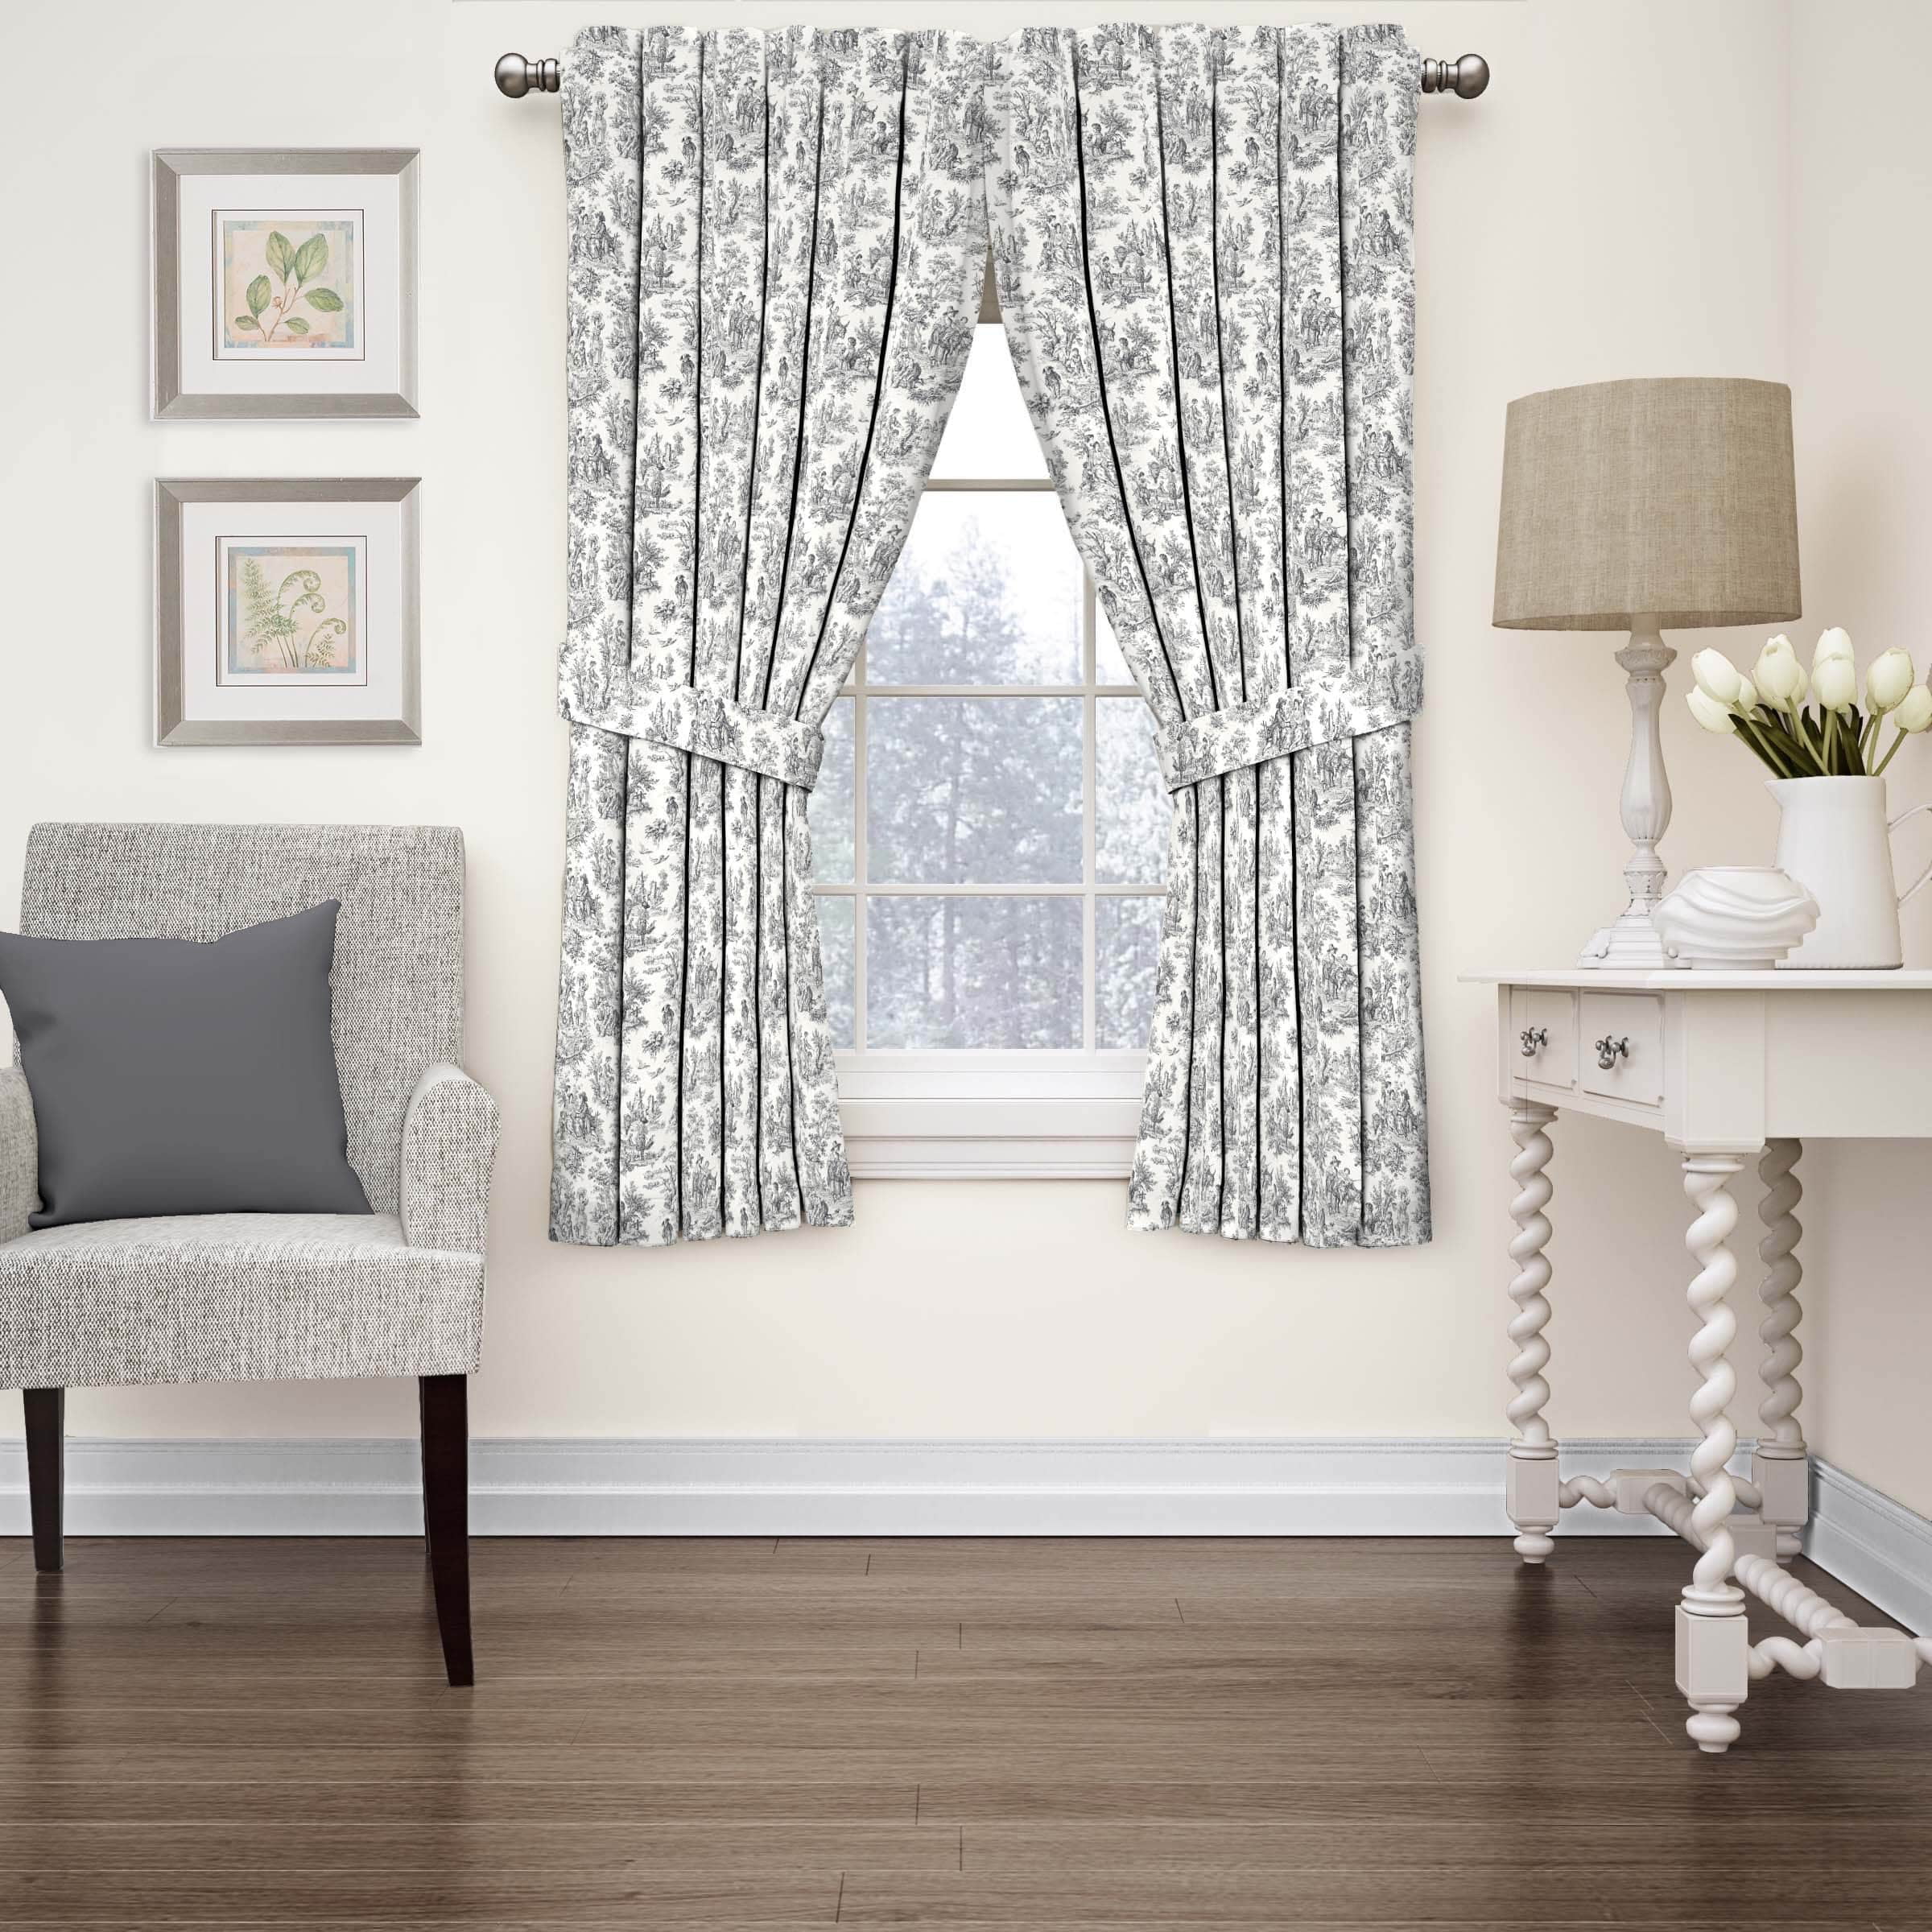 Waverly Charmed Life Toile Window, Waverly Black Toile Shower Curtain